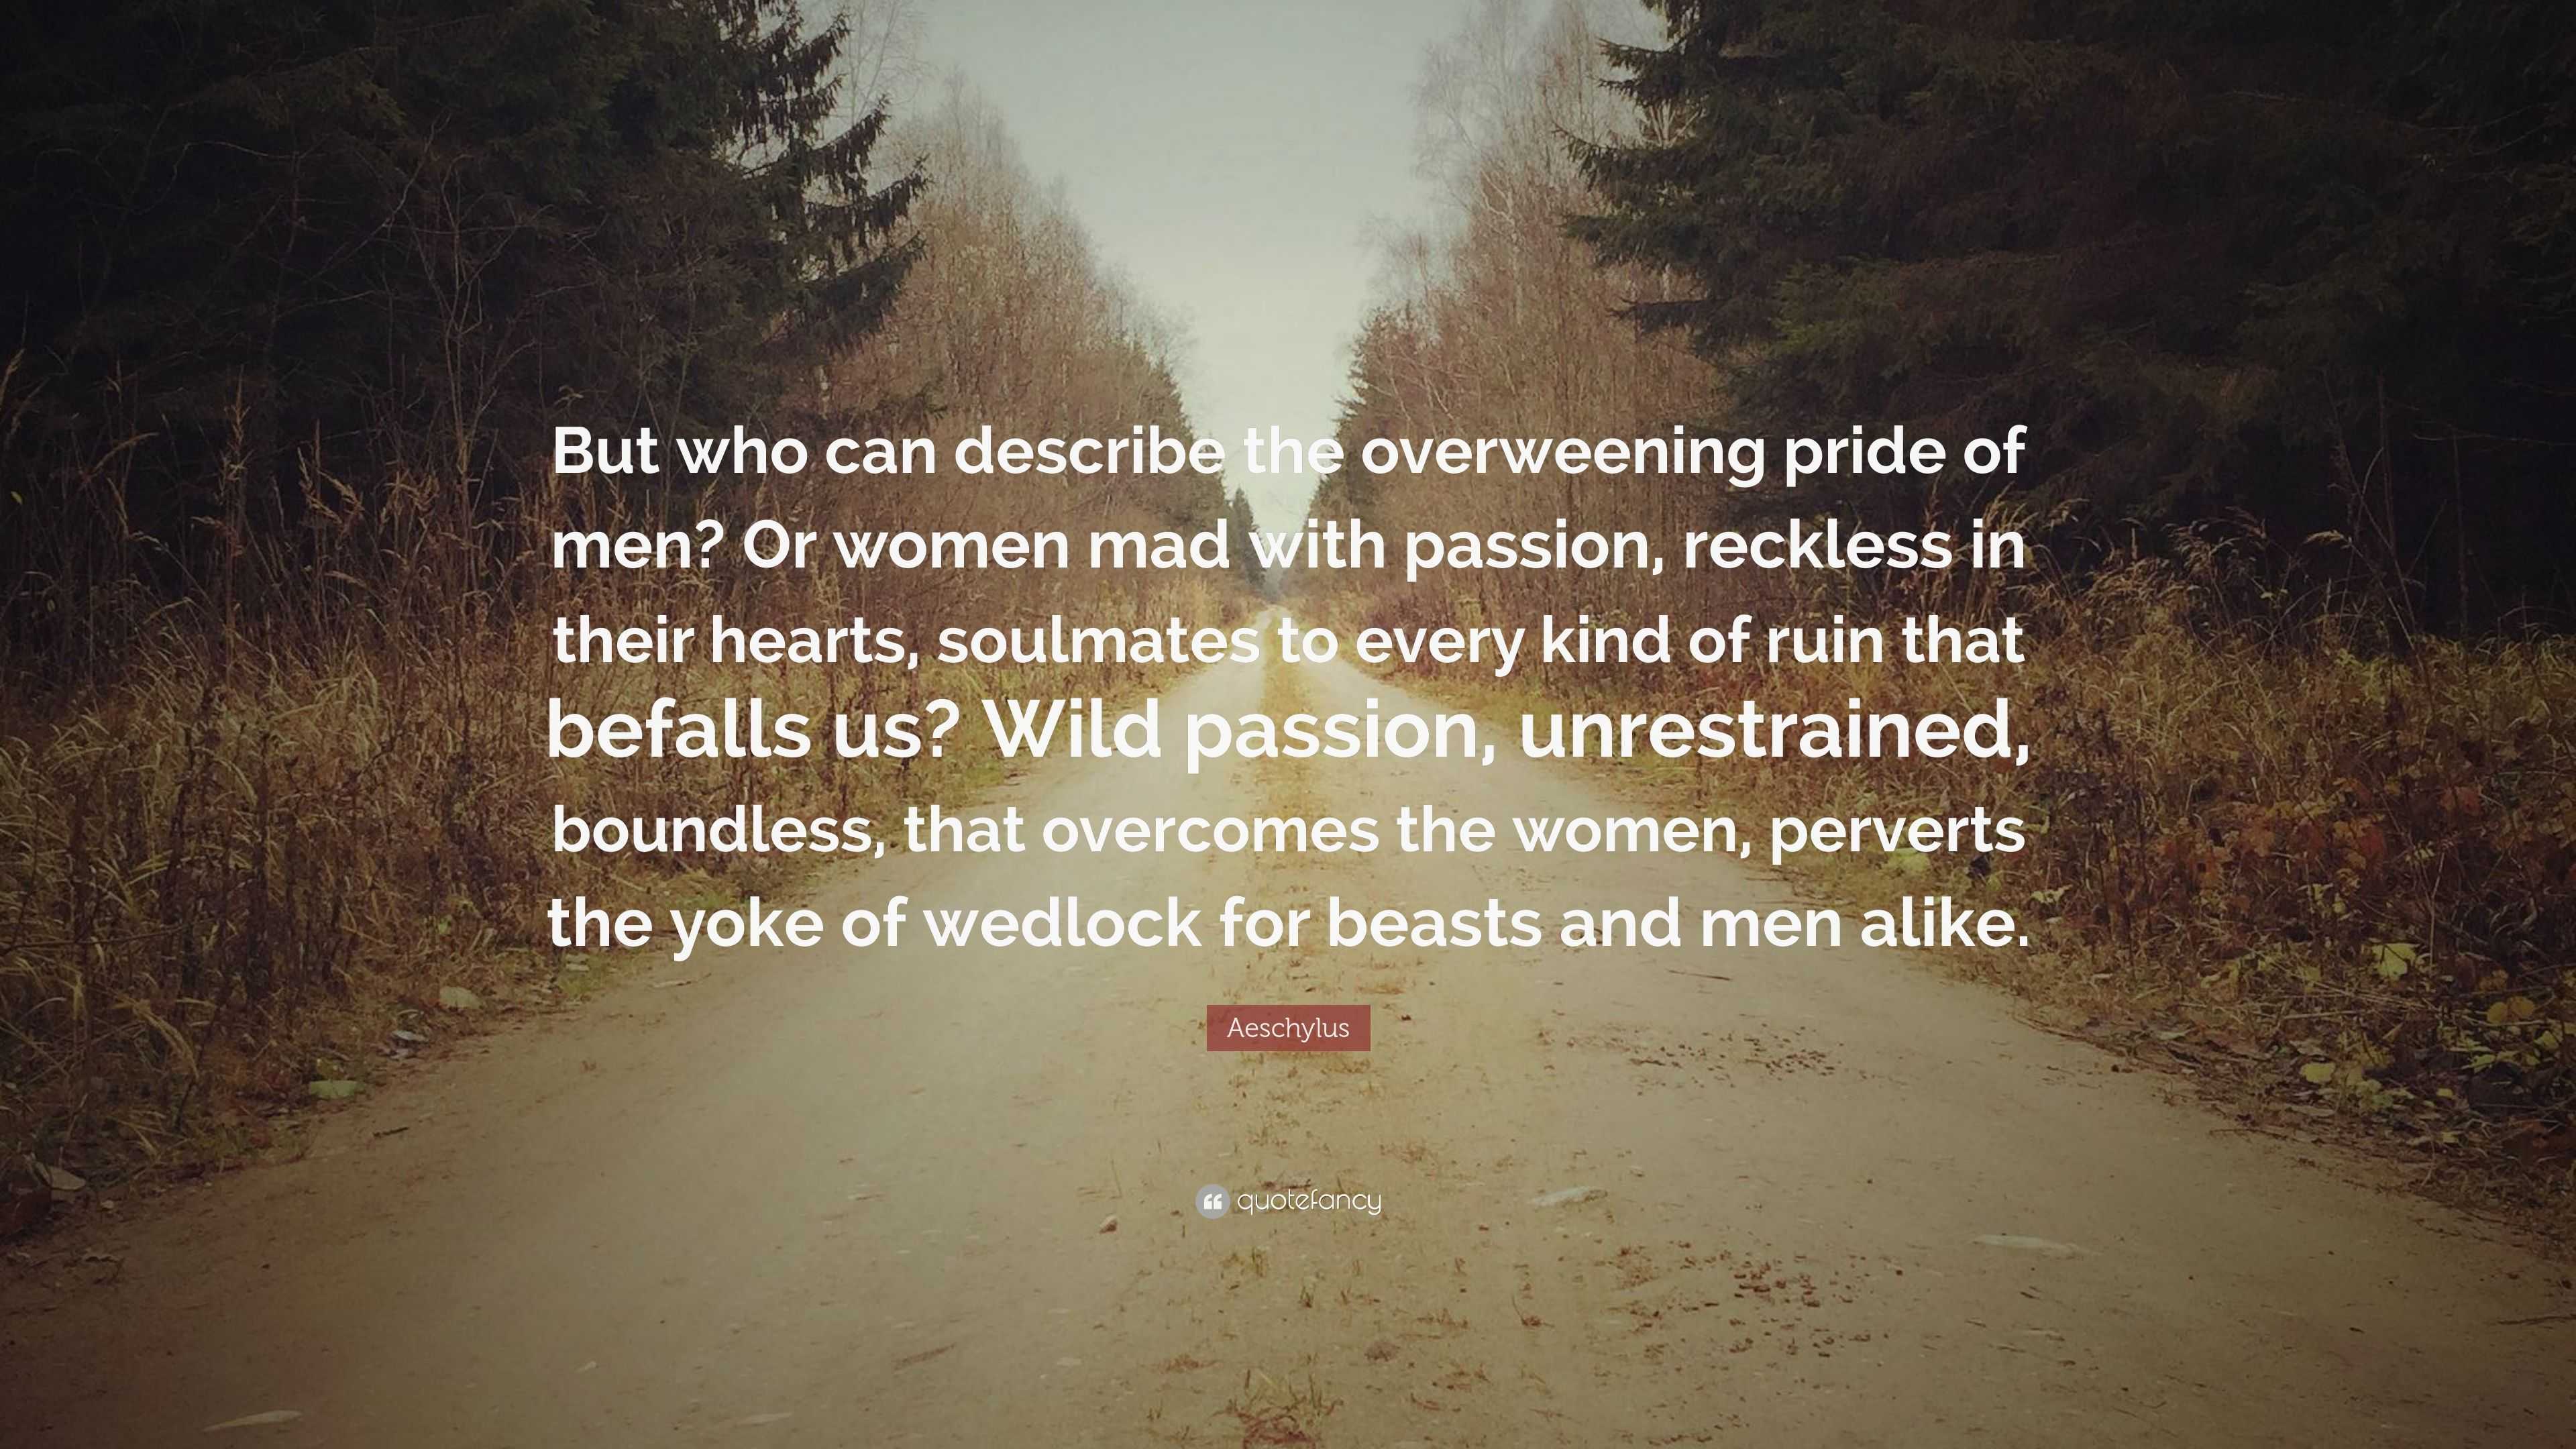 Aeschylus Quote: “But who can describe the overweening pride of men? Or ...